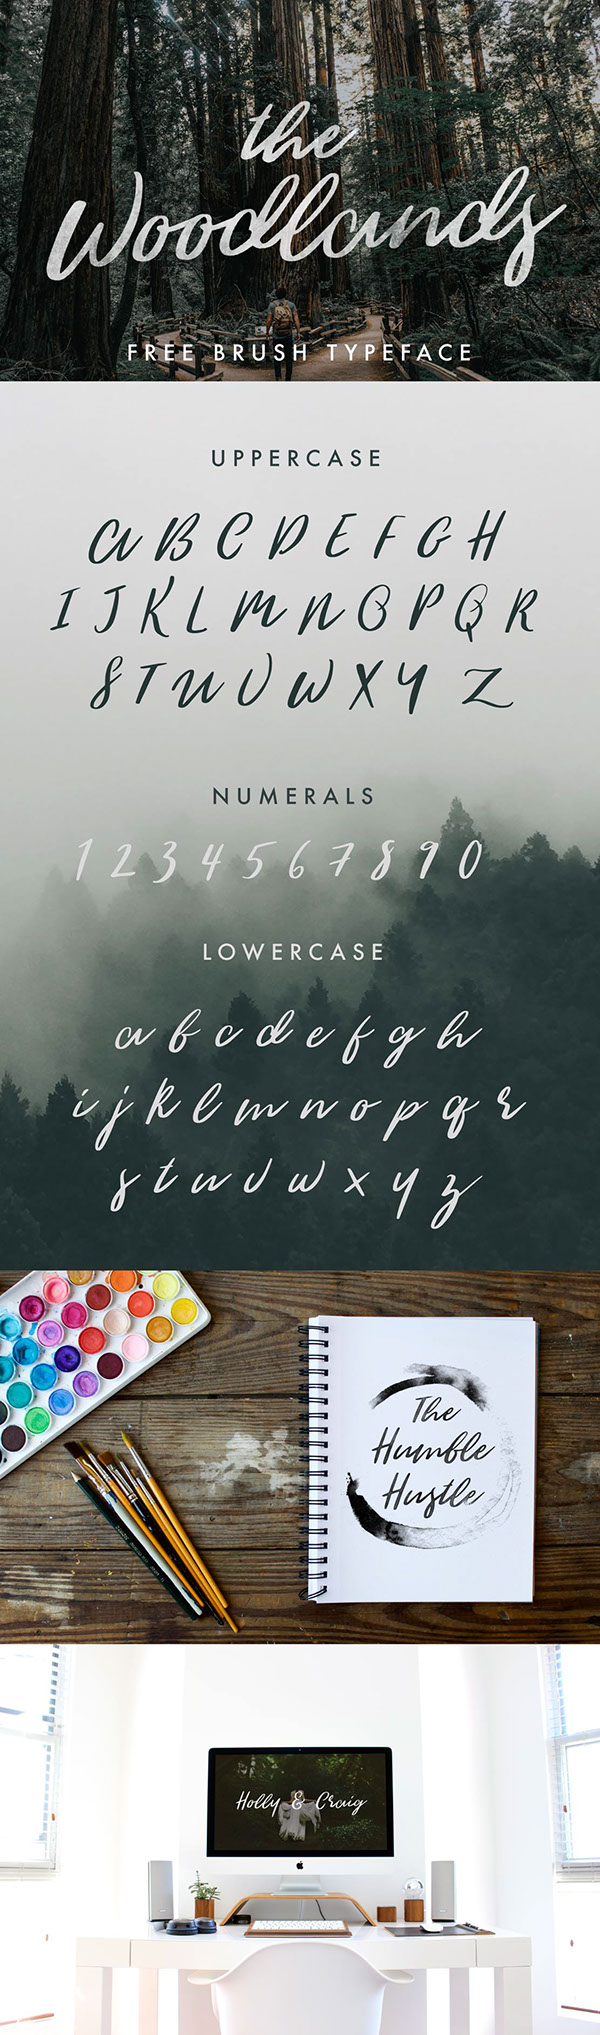 THE WOODLANDS - FREE FONT